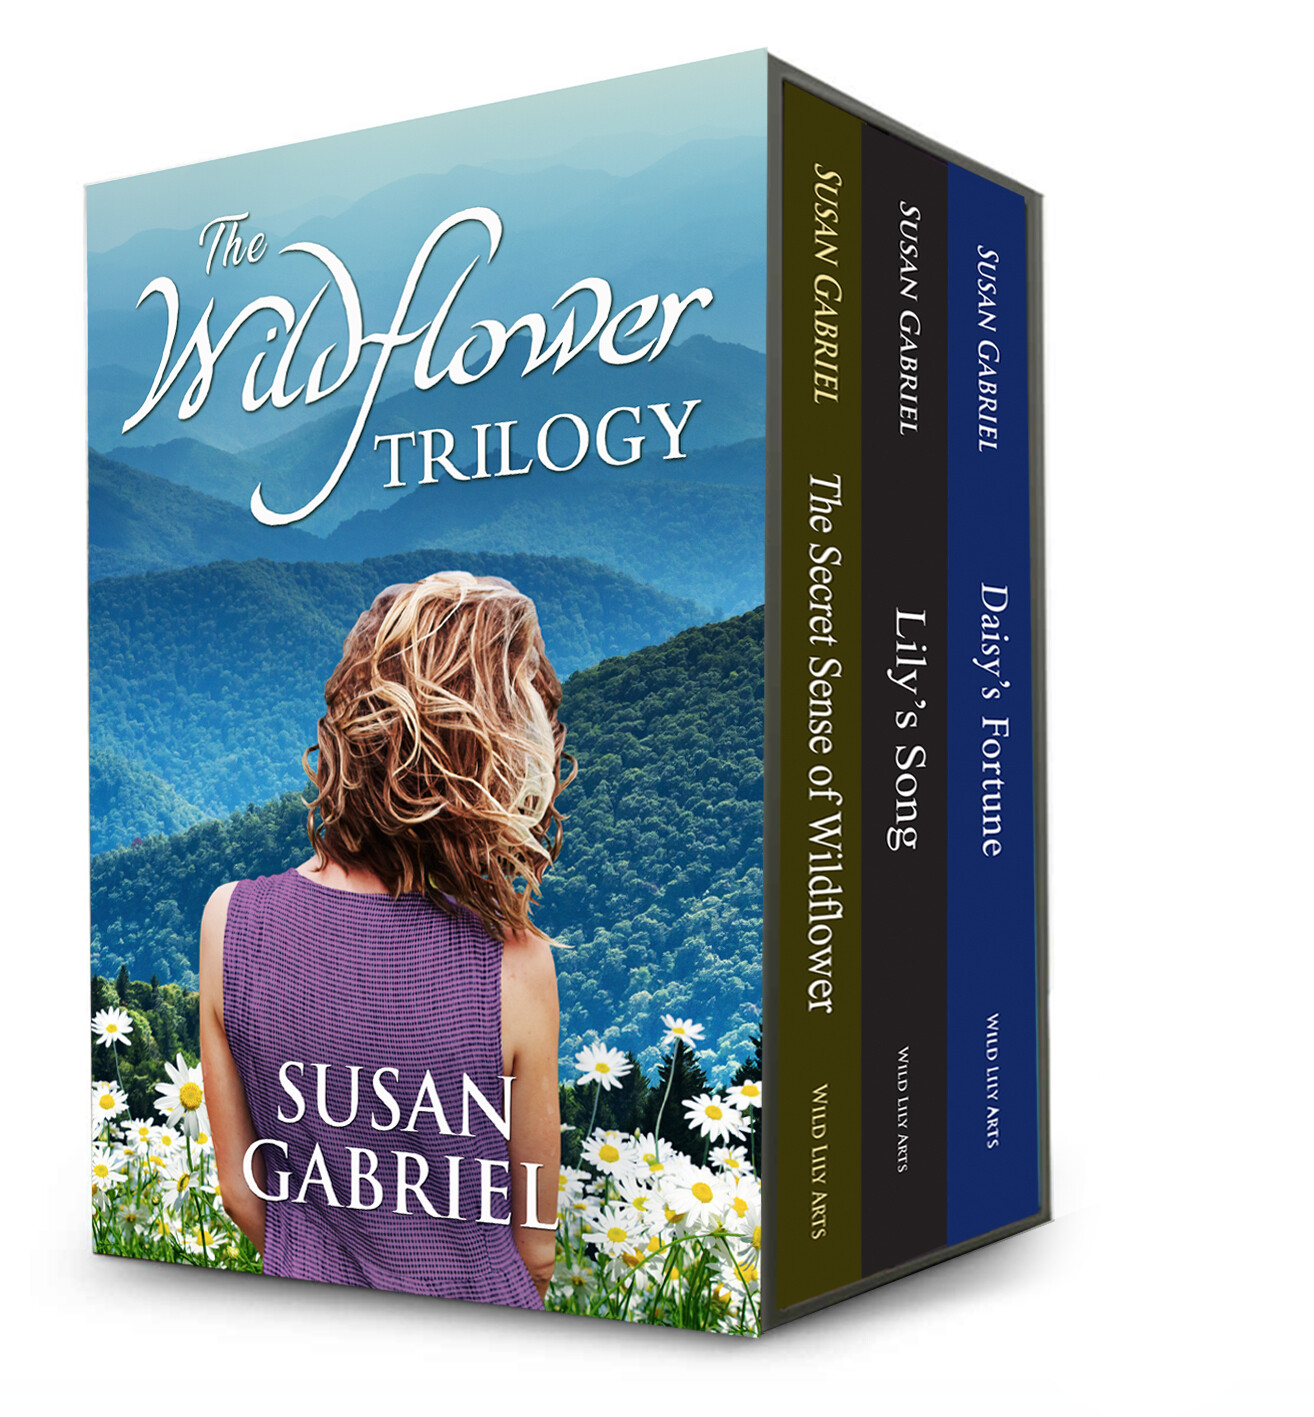 The Wildflower Trilogy - one volume paperback, autographed by the author